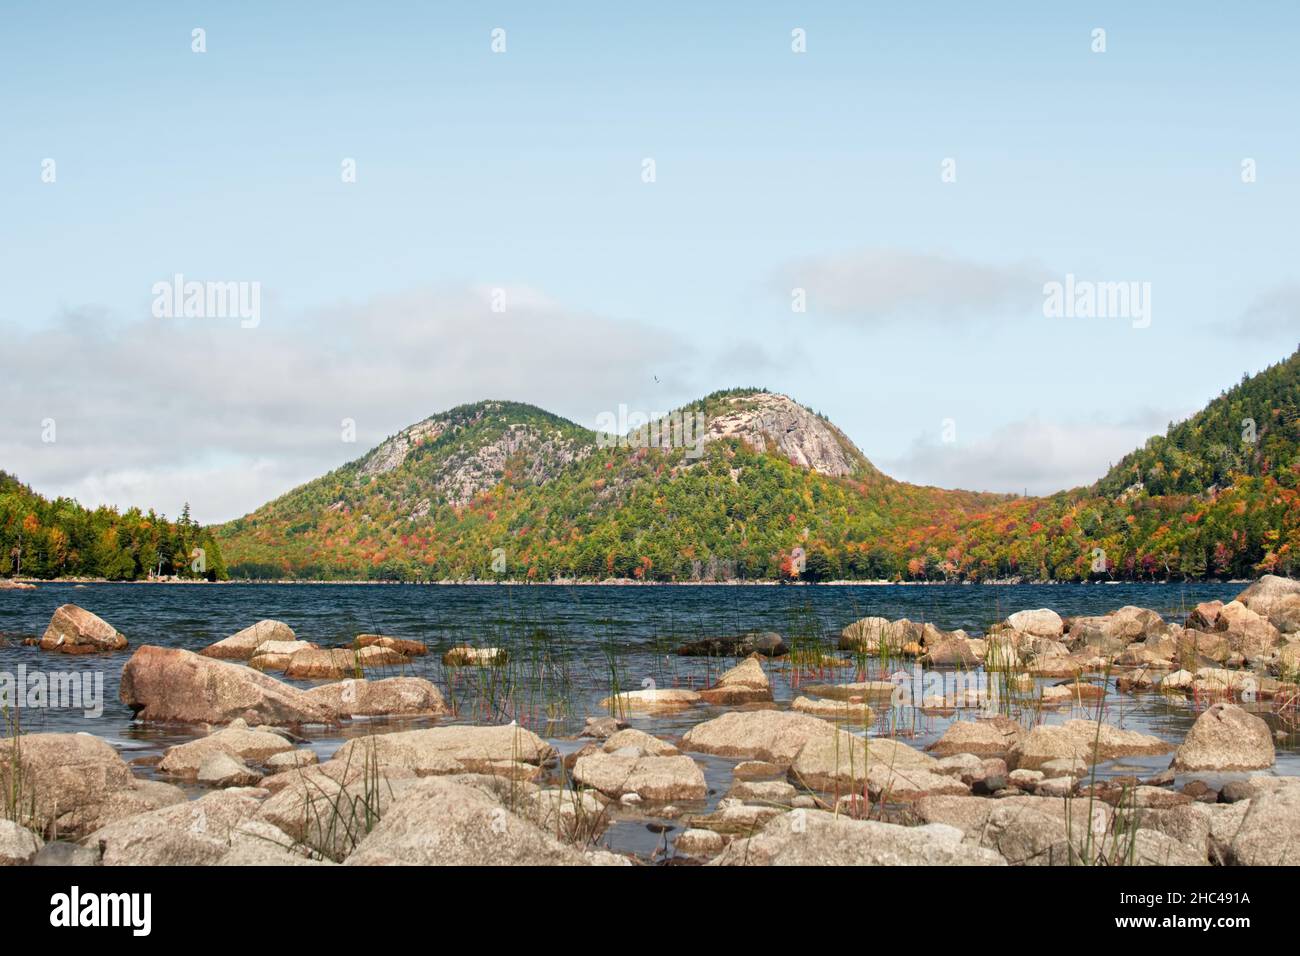 Scenic view of the Jordan Pond in Acadia National Park near the town of Bar Harbor, Maine Stock Photo